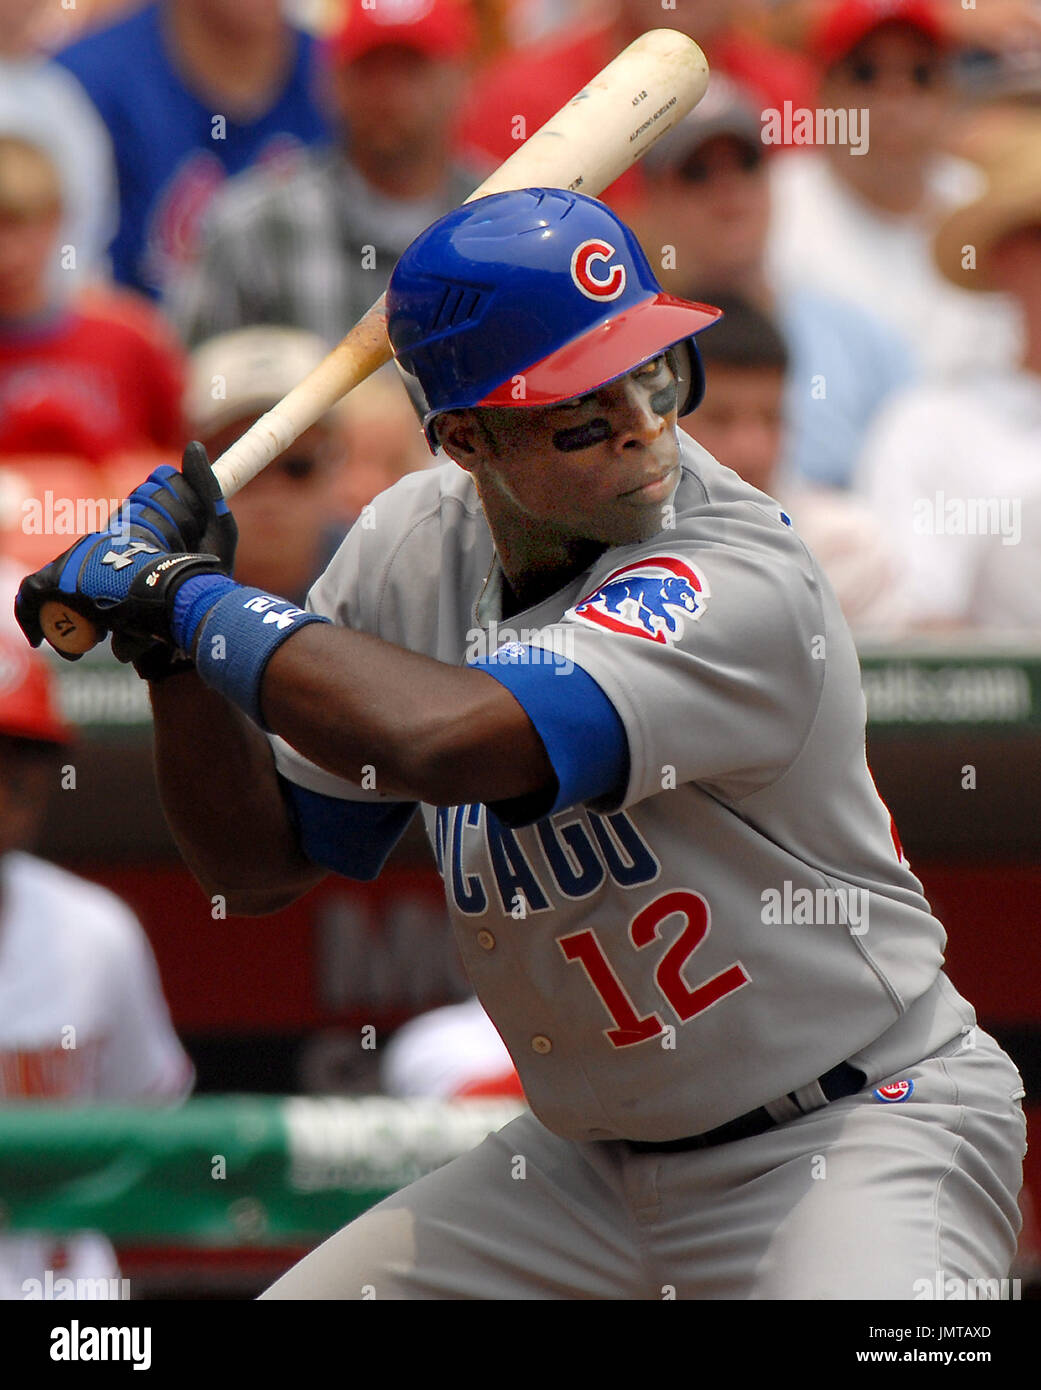 Washington, D.C. - July 4, 2007 -- Chicago Cubs all-star left fielder Alfonso Soriano (12) bats in the third inning against the Washington Nationals at RFK Stadium in Washington, D.C. on Wednesday, July 4, 2007.  The Nationals won the game 6 - 0. Credit: Ron Sachs / CNP Stock Photo